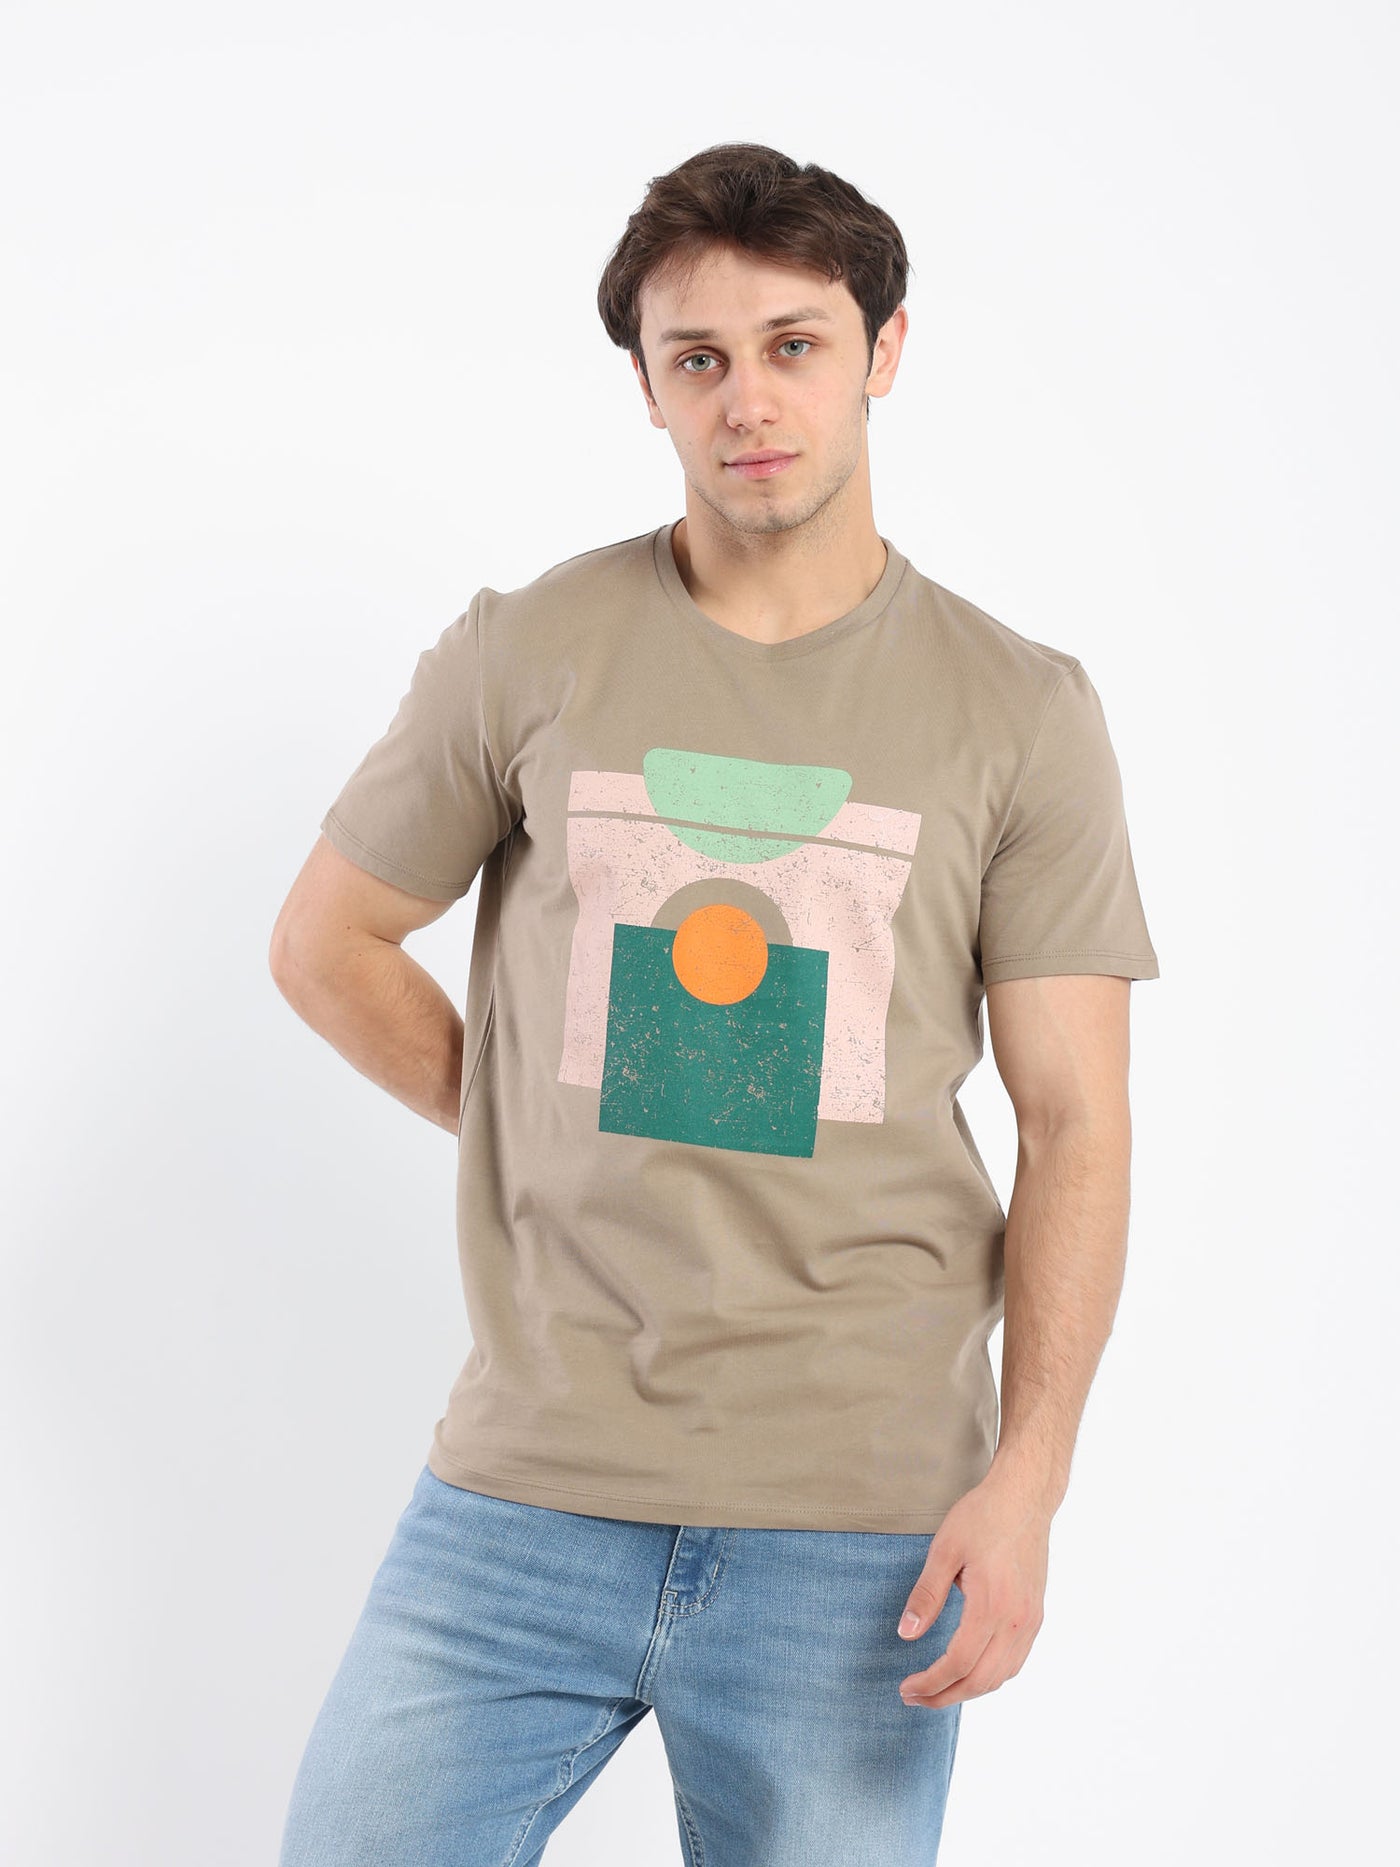 T-Shirt -"Abstract Shapes" Front Print - Regular Fit